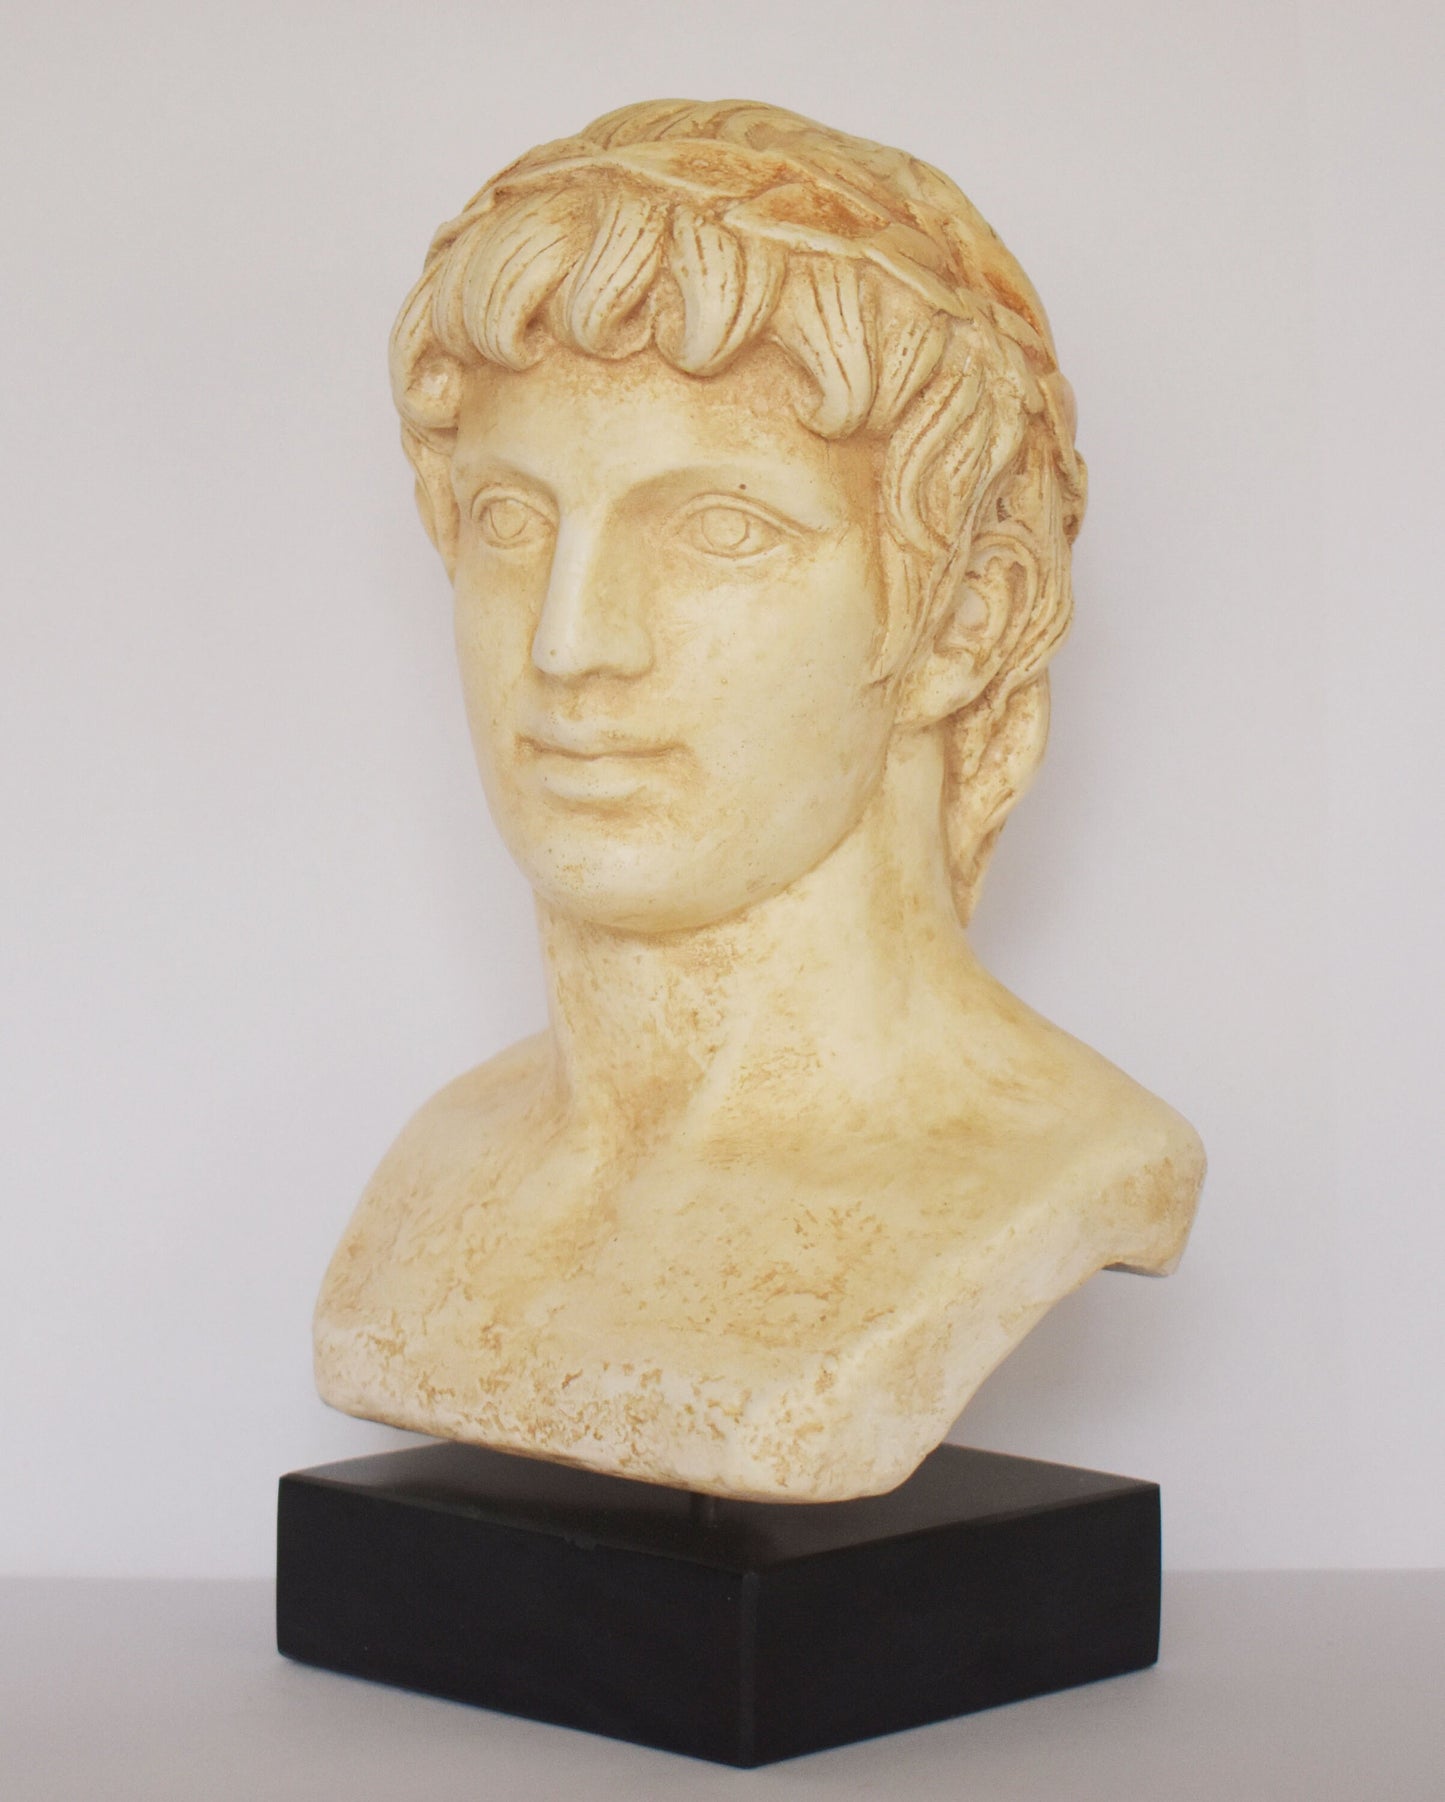 Apollo- God of Music,Poetry, Art, Prophecy, Truth, Archery, Plague, Healing, Sun and Light  - Marble Base - Head Bust